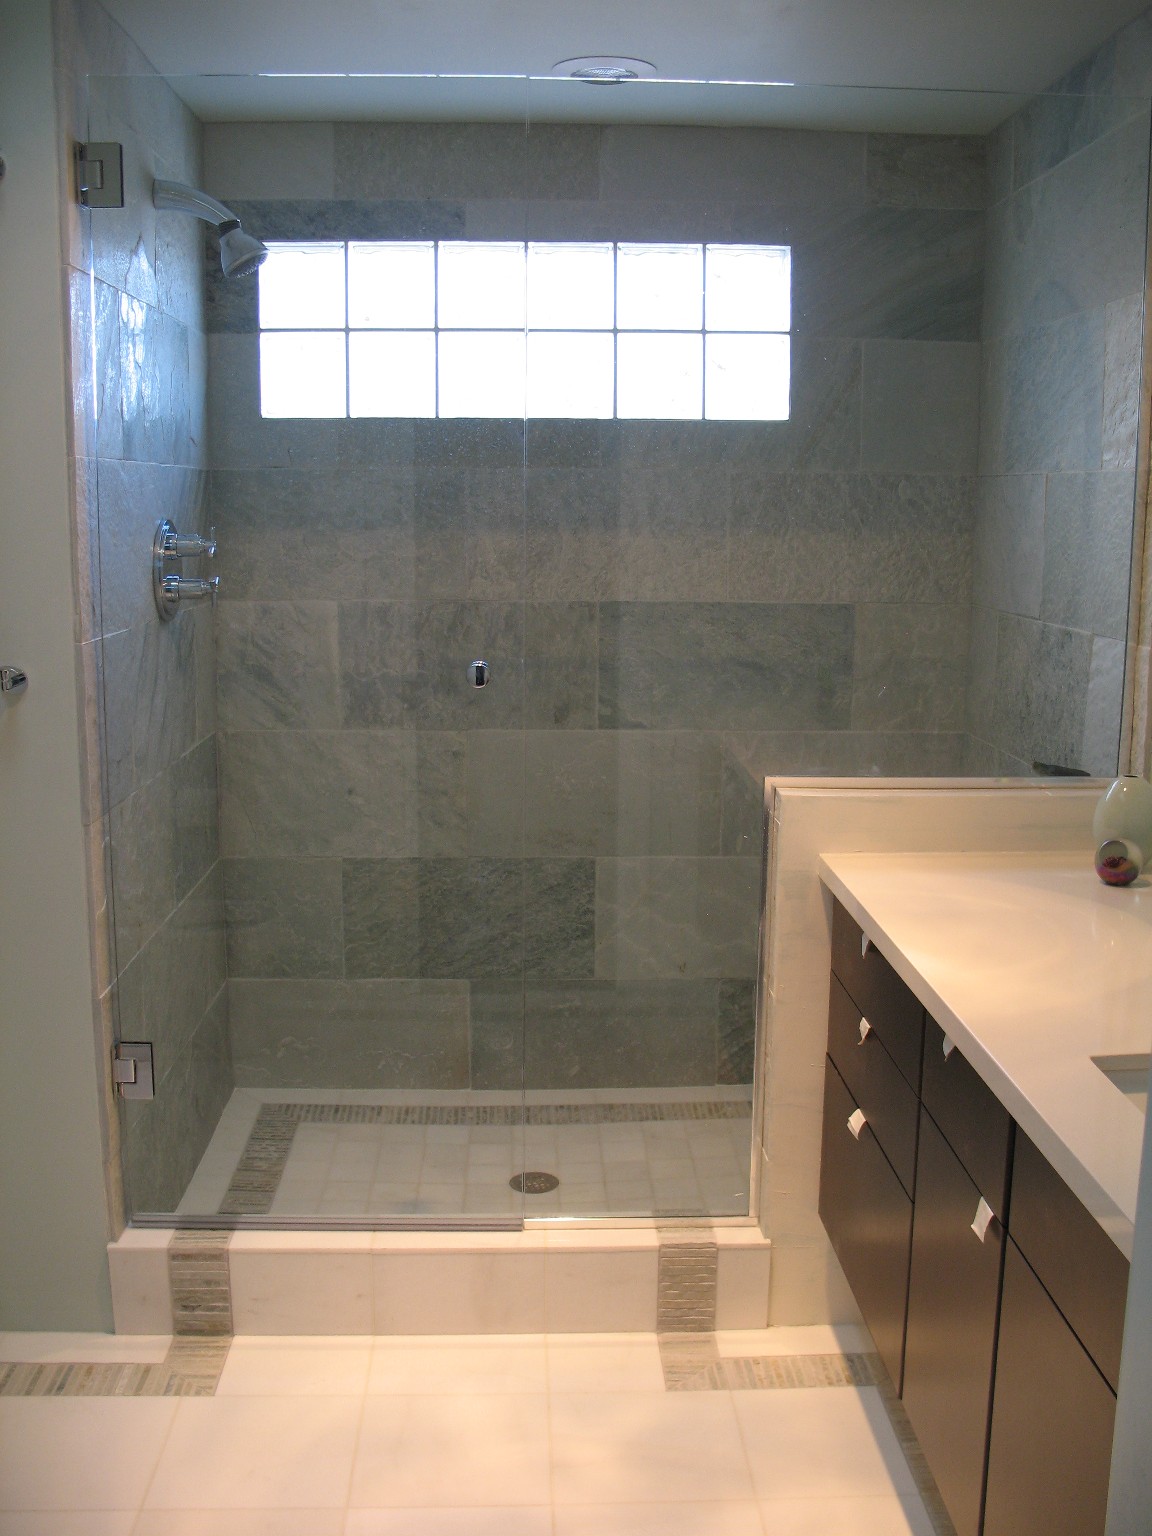 bath tile ideas  tile but what do you think about that border running over the shower